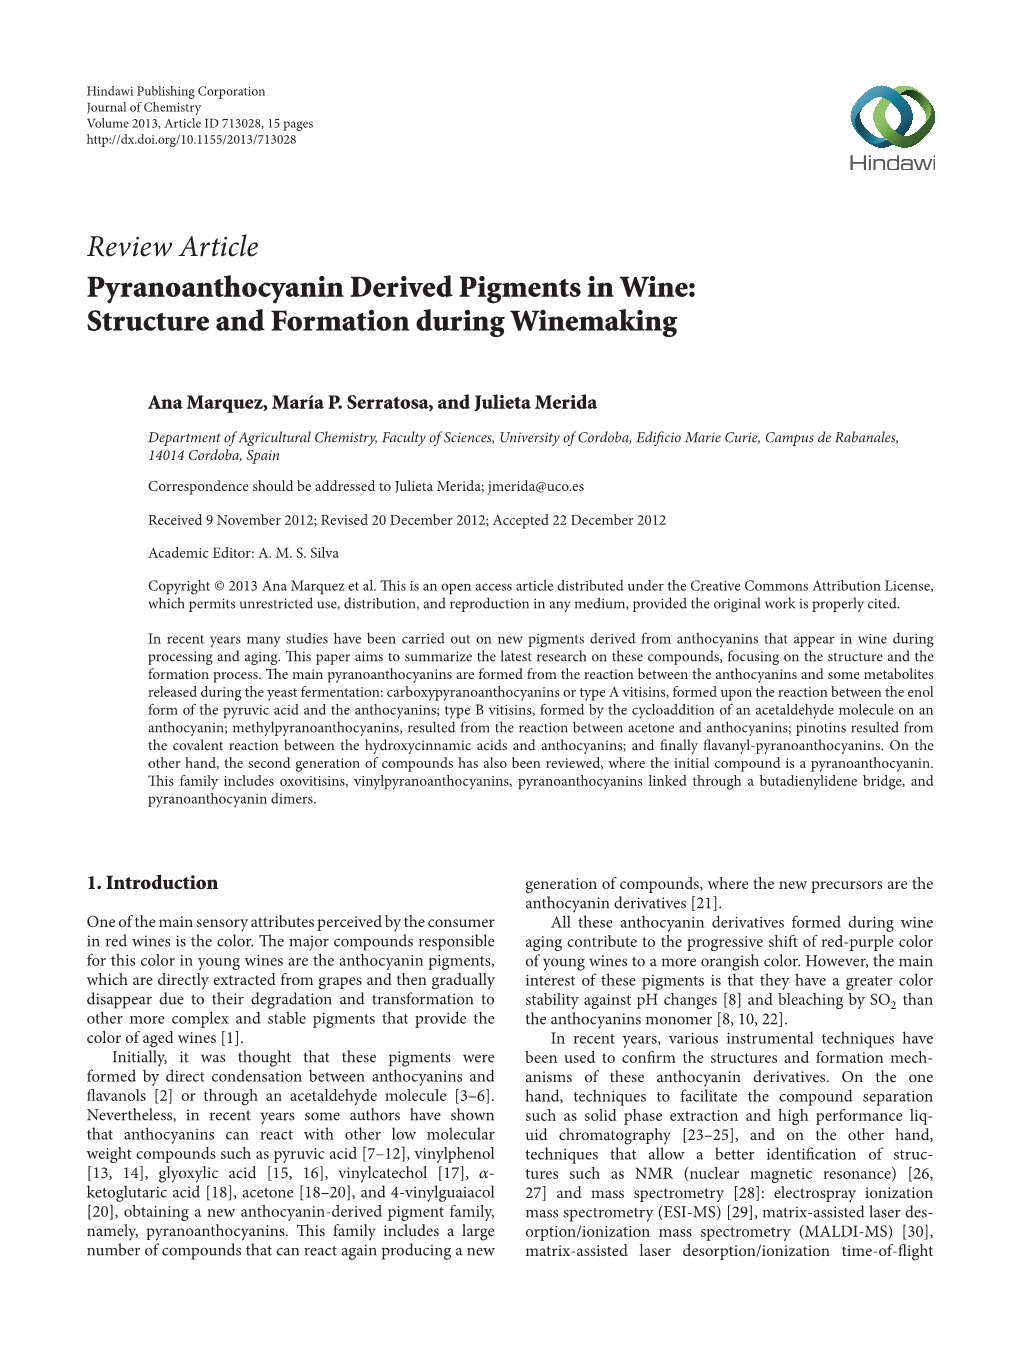 Pyranoanthocyanin Derived Pigments in Wine: Structure and Formation During Winemaking